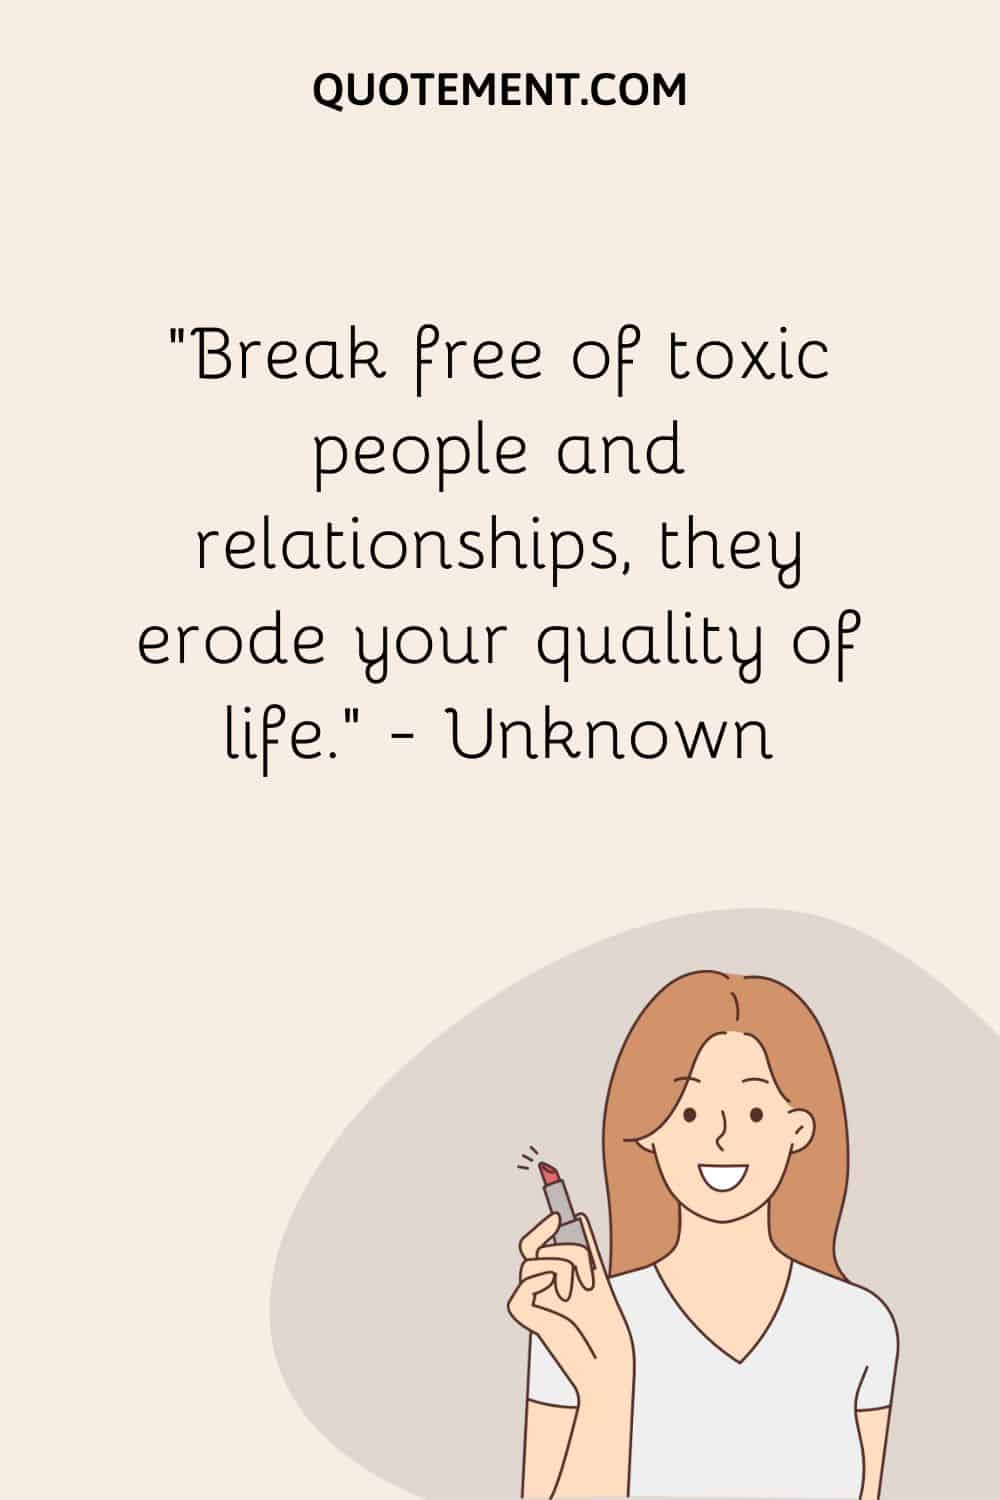 Break free of toxic people and relationships, they erode your quality of life